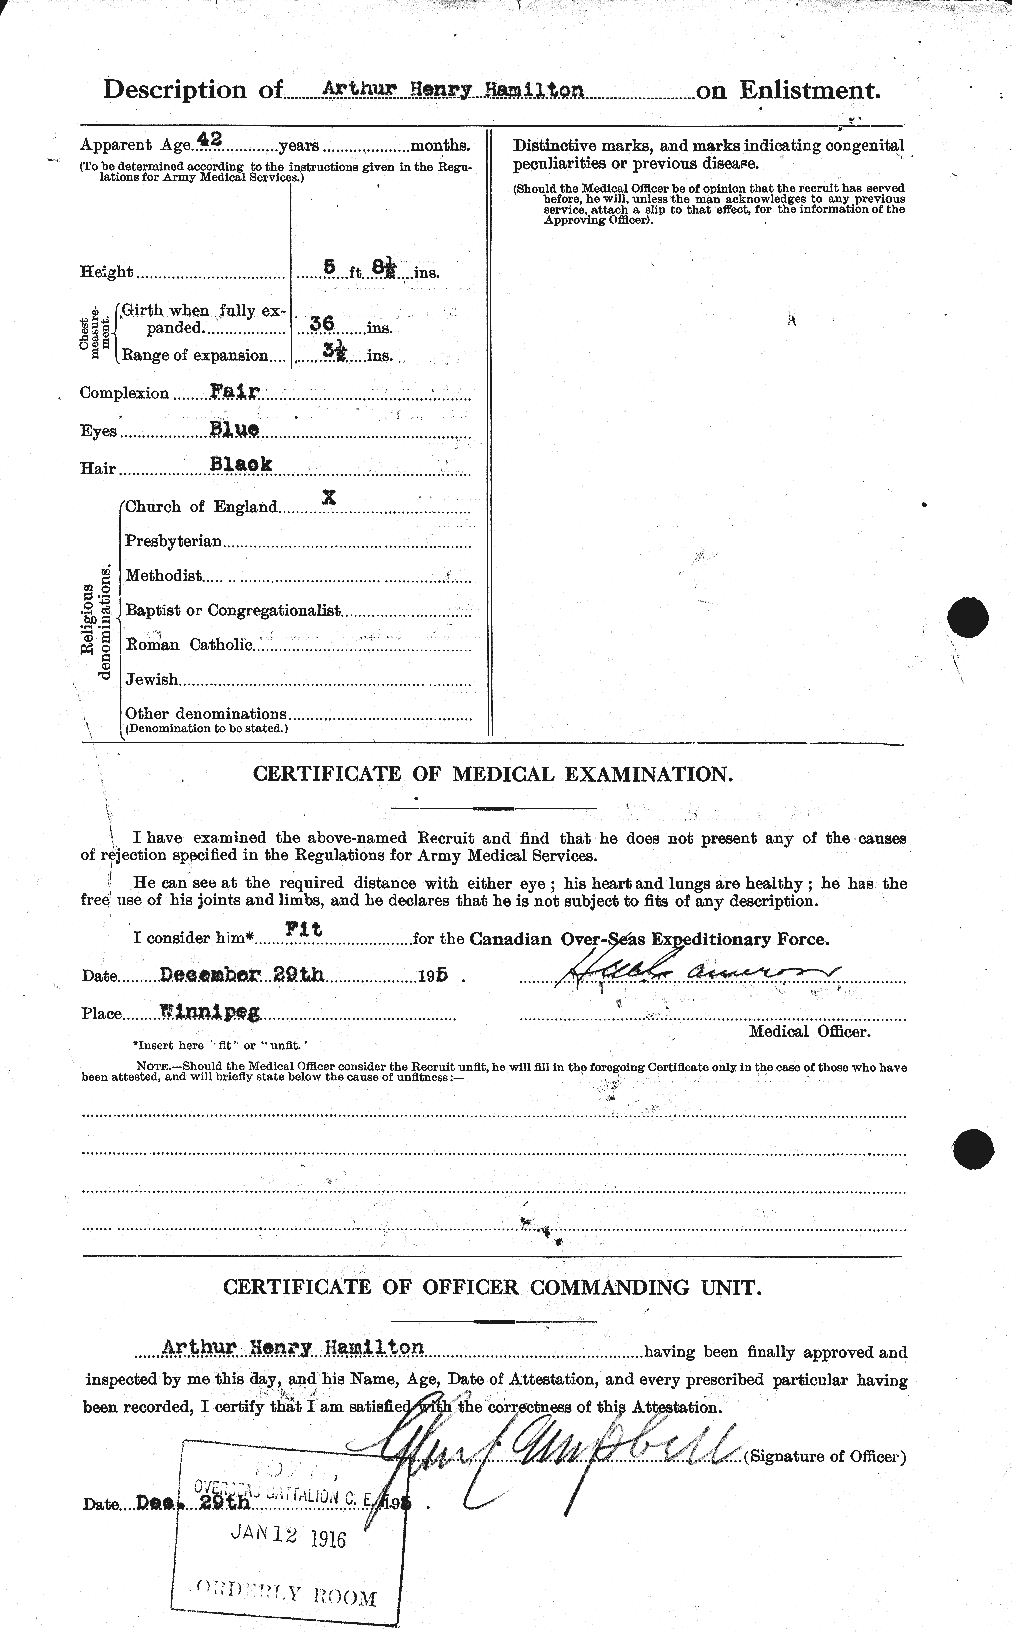 Personnel Records of the First World War - CEF 375251b